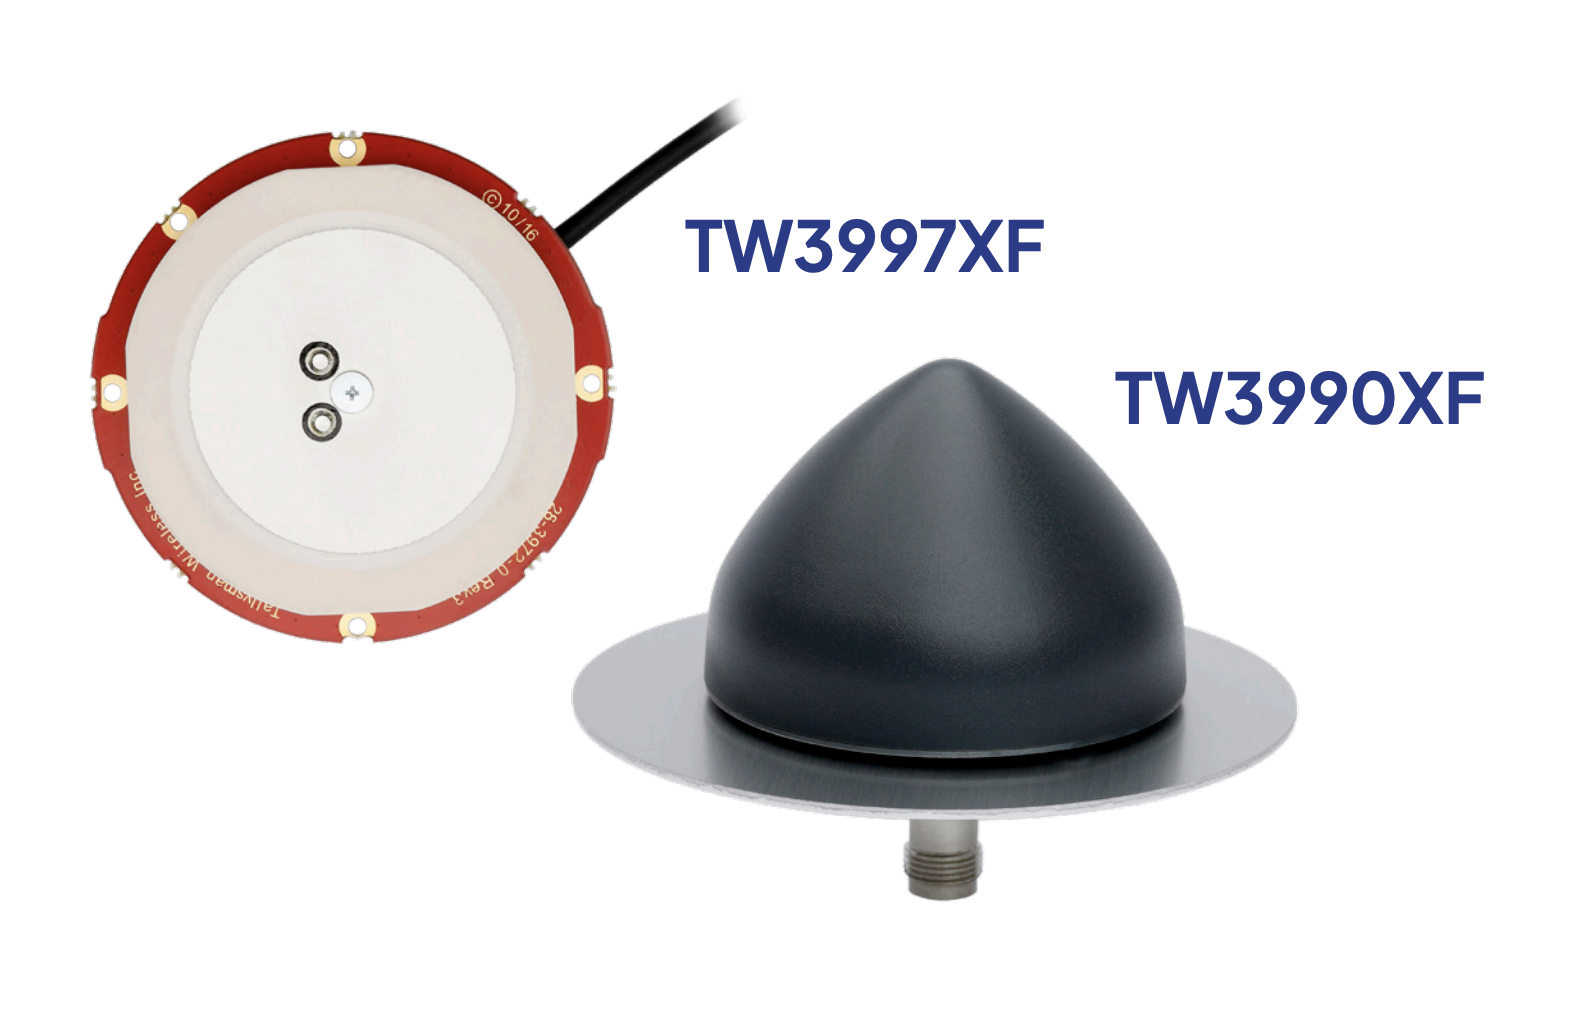 Calian Adds Three New Multi-Constellation, Full-Band Accutenna® GNSS Antennas to Its TW3000 Xf Antenna Family